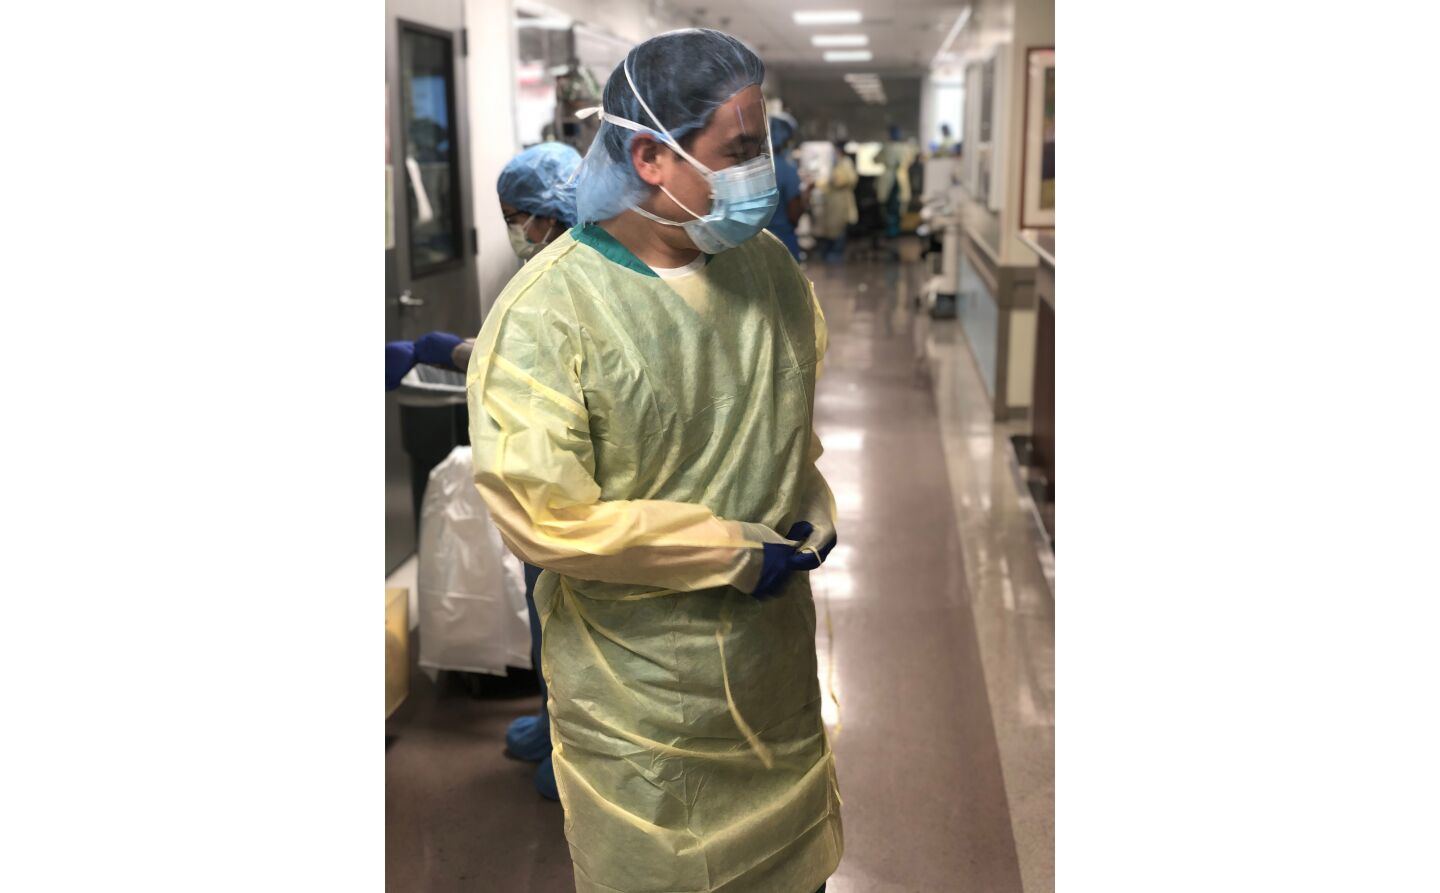 Dr. Glen Chun dons his personal protective equipment